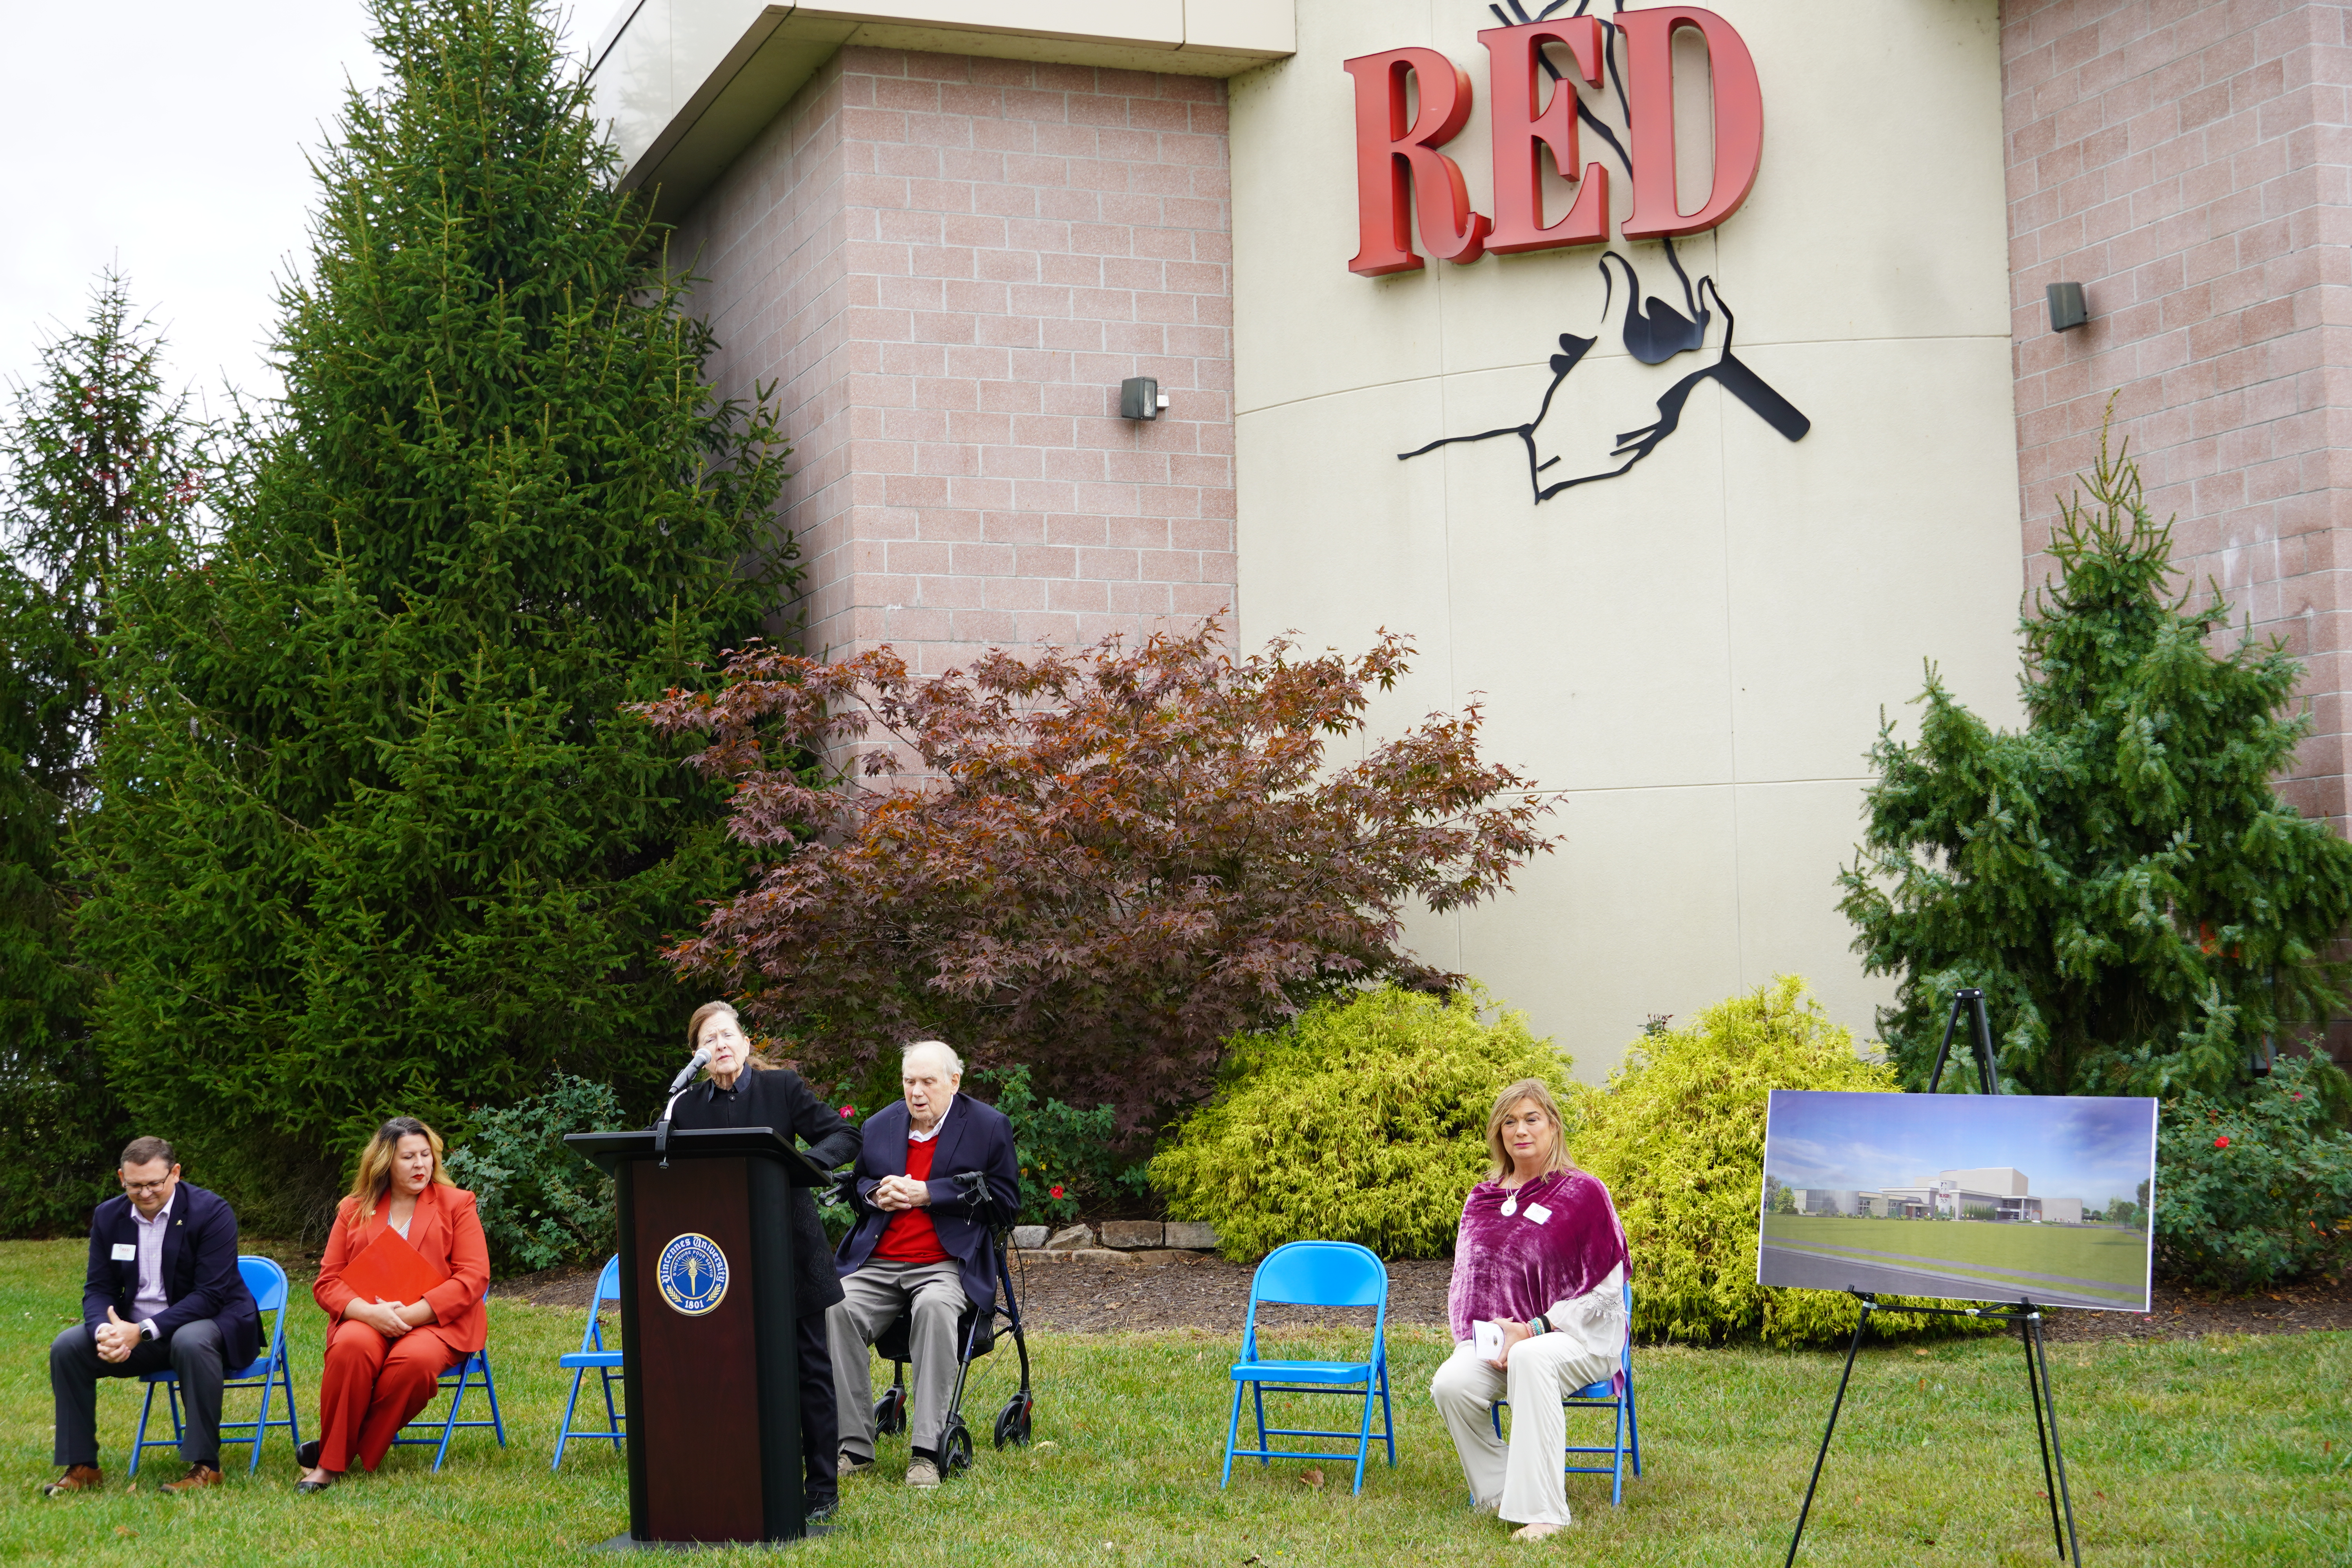 Lothian Skelton stands at podium in front of Red Skelton Performing Arts Center and speaks to the crowd during a ceremonial groundbreaking for the Lothian and Red Skelton Gallery of Fine Art.